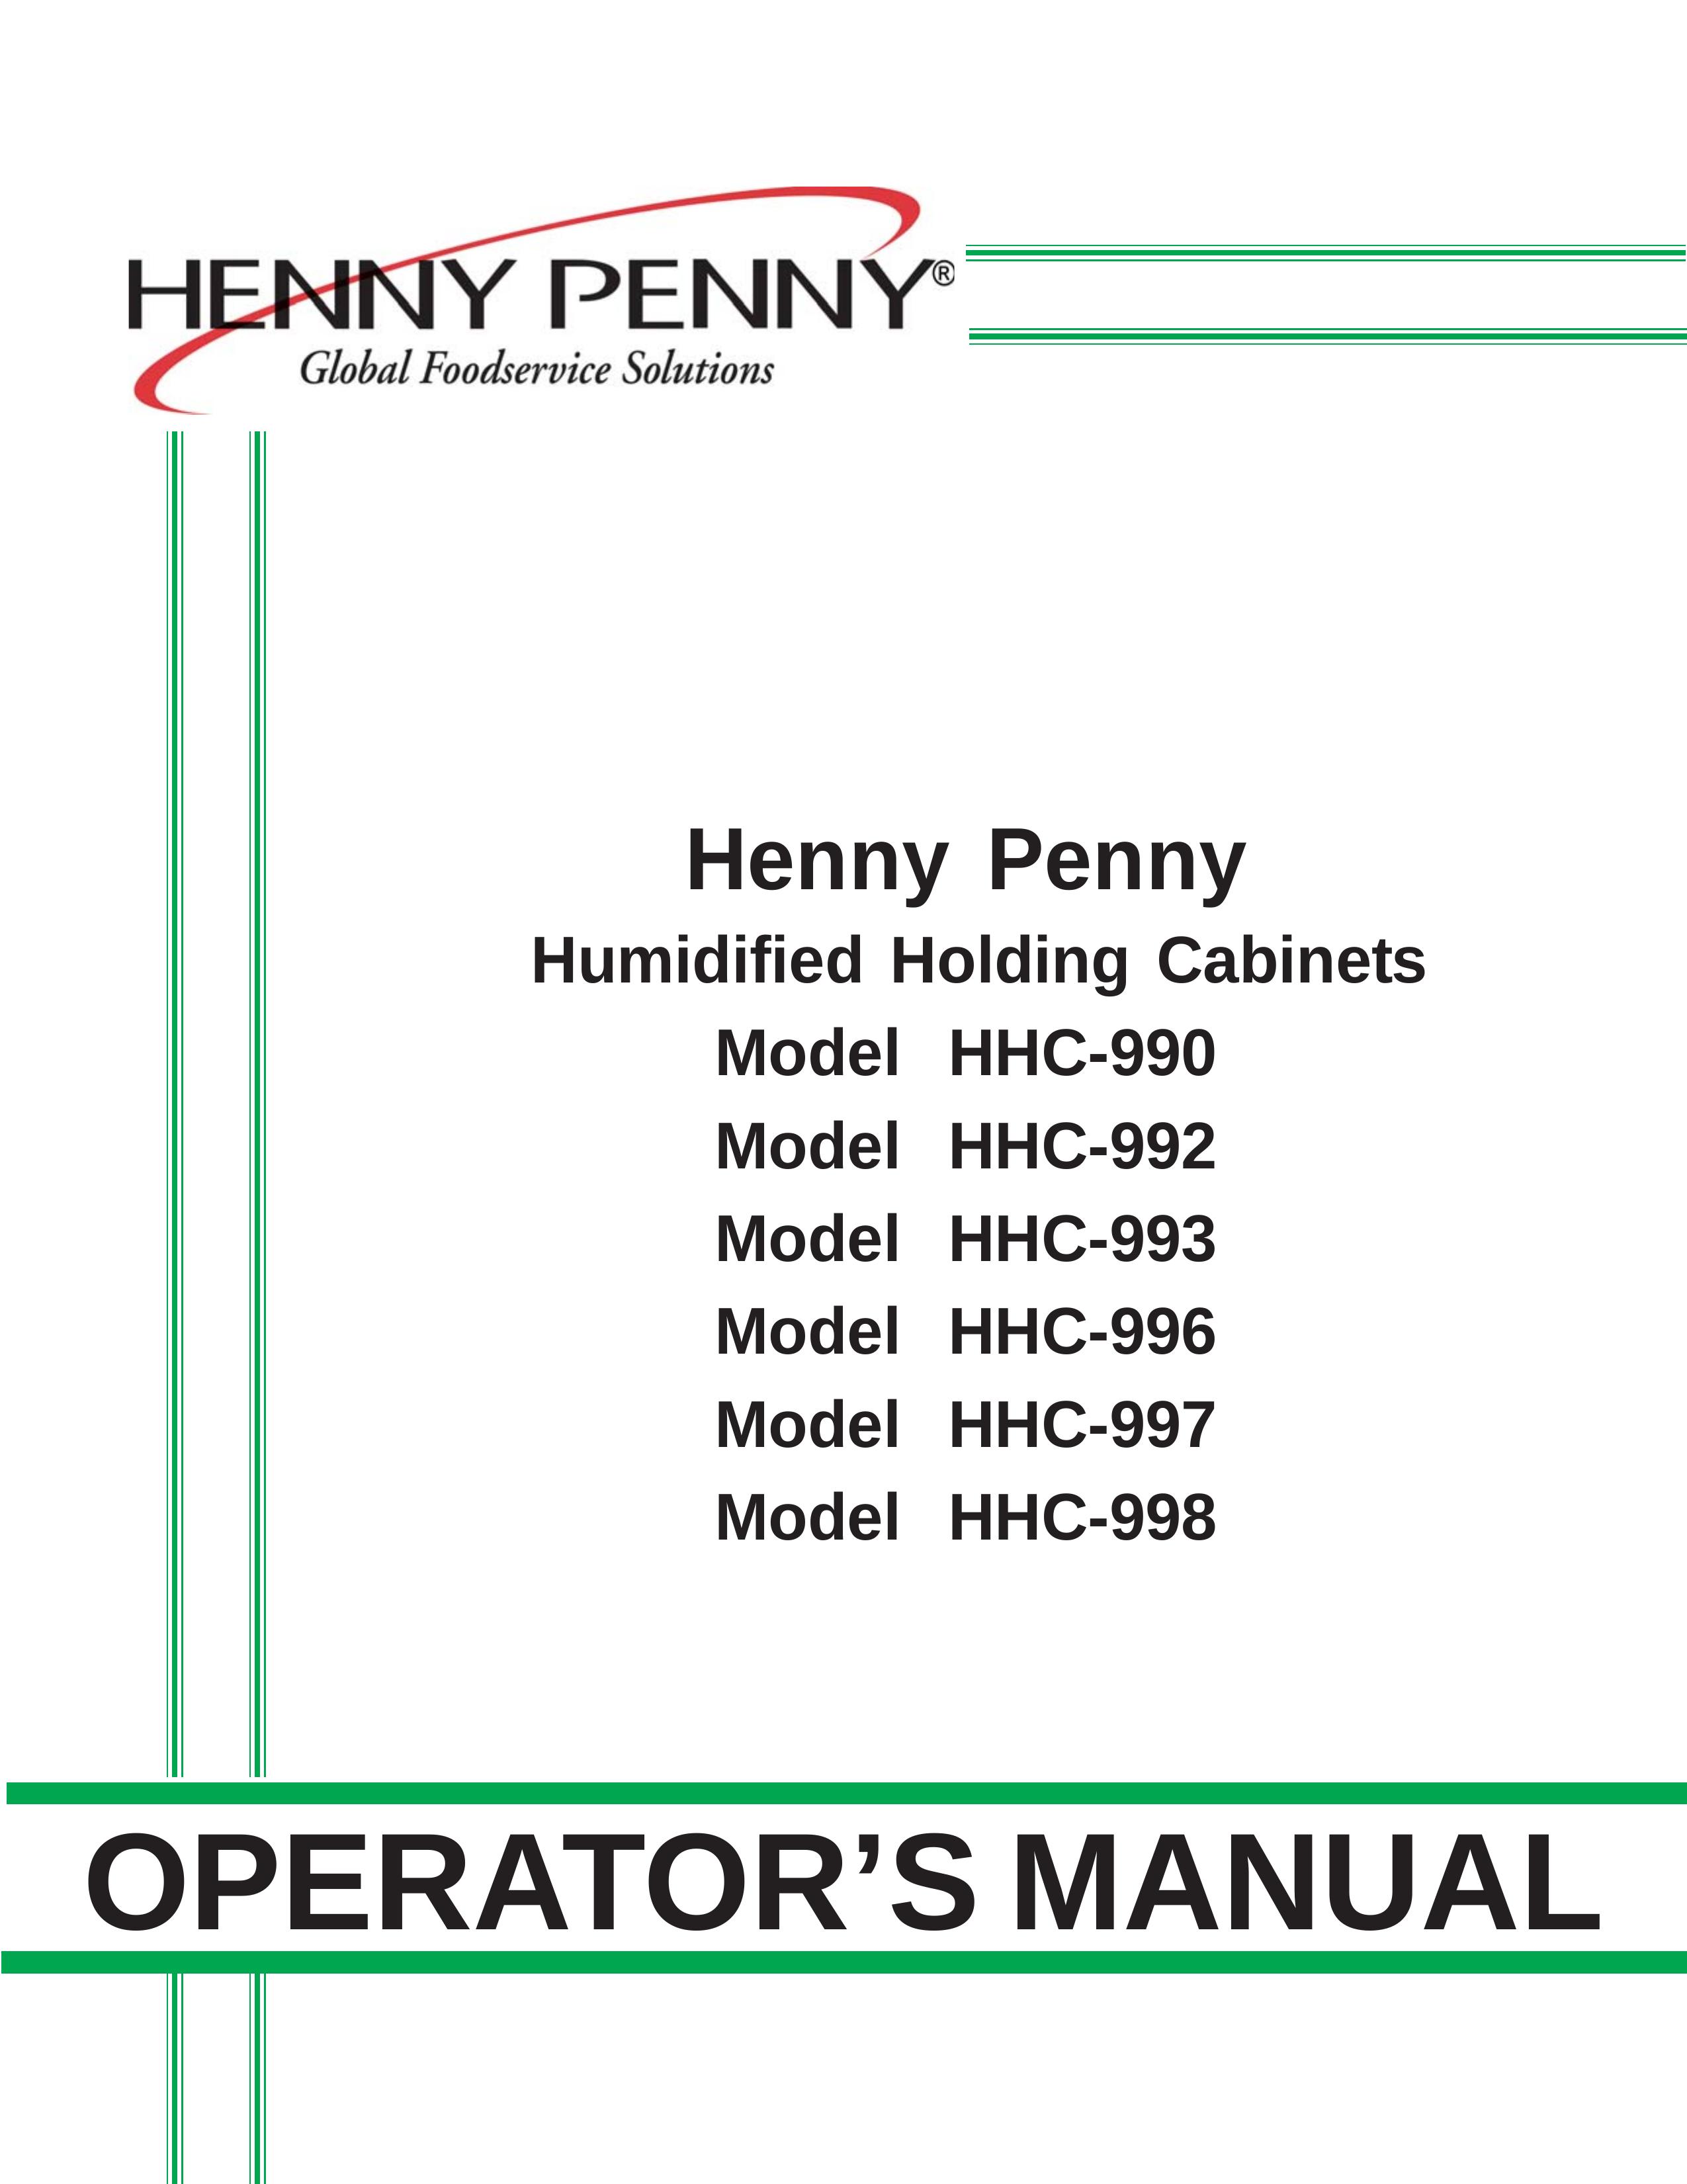 Henny Penny HHC-998 Clothes Dryer User Manual